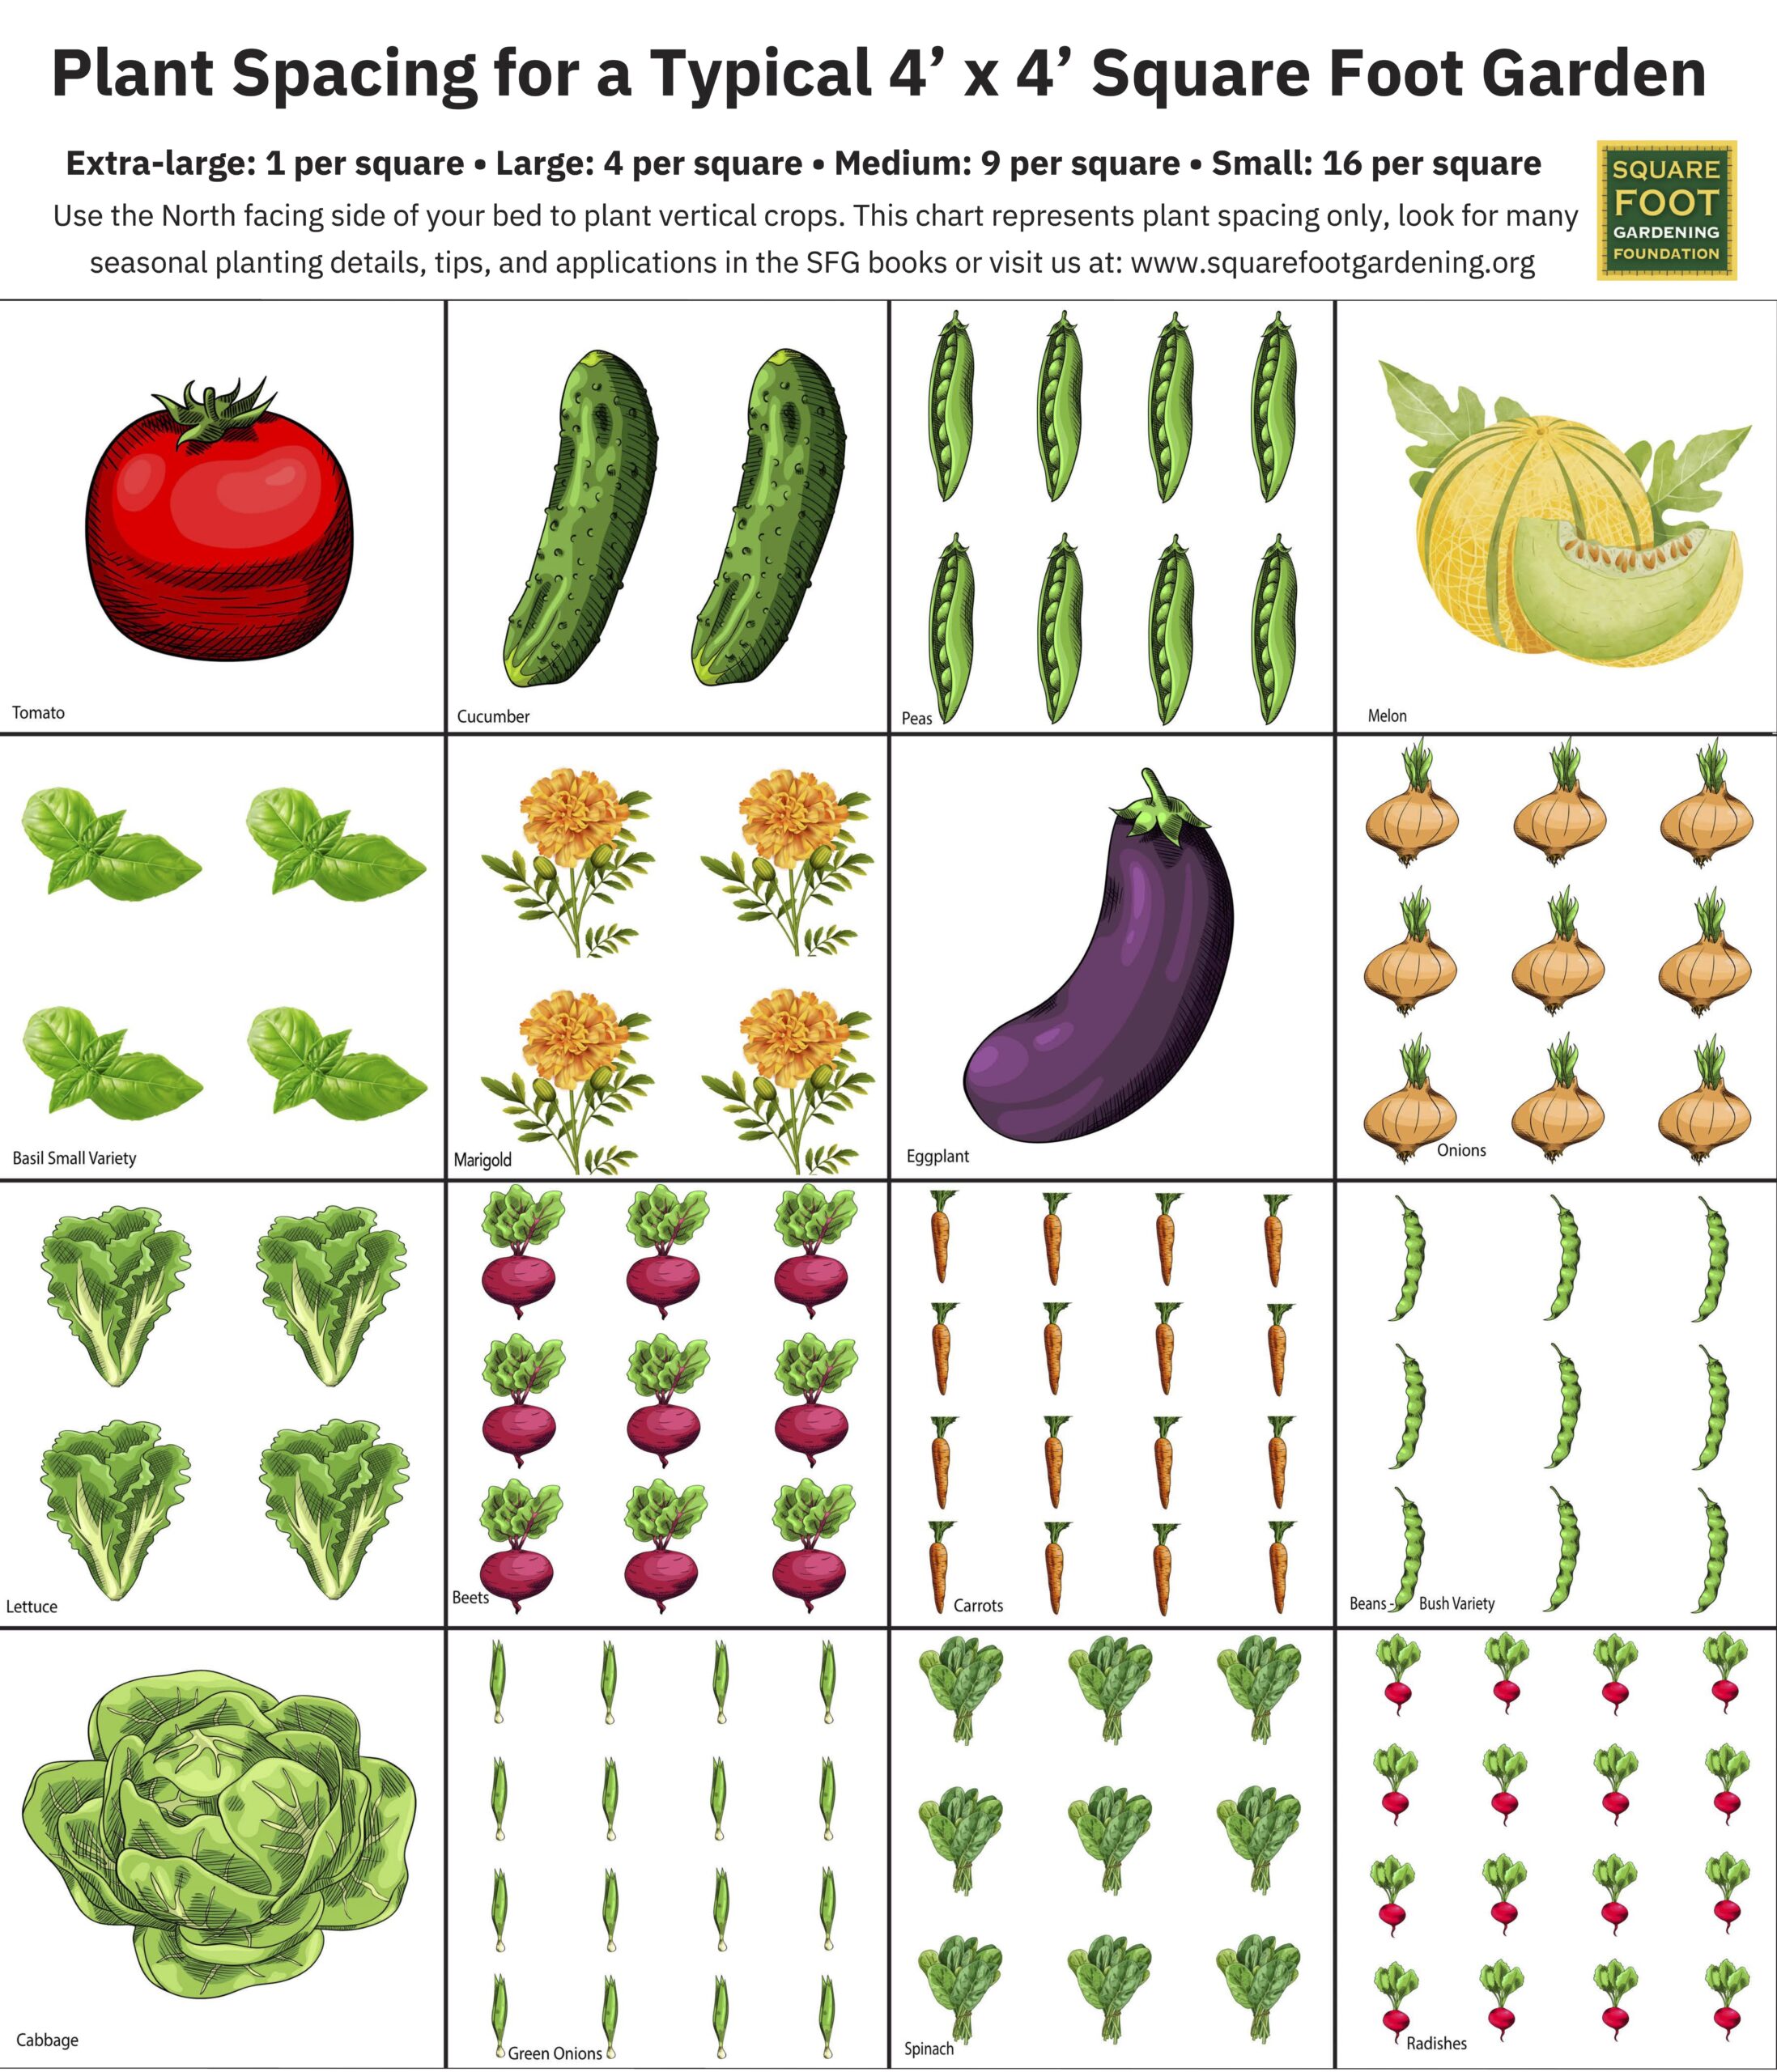 A chart detailing the plant spacing system for use in the Square Foot Garden system.